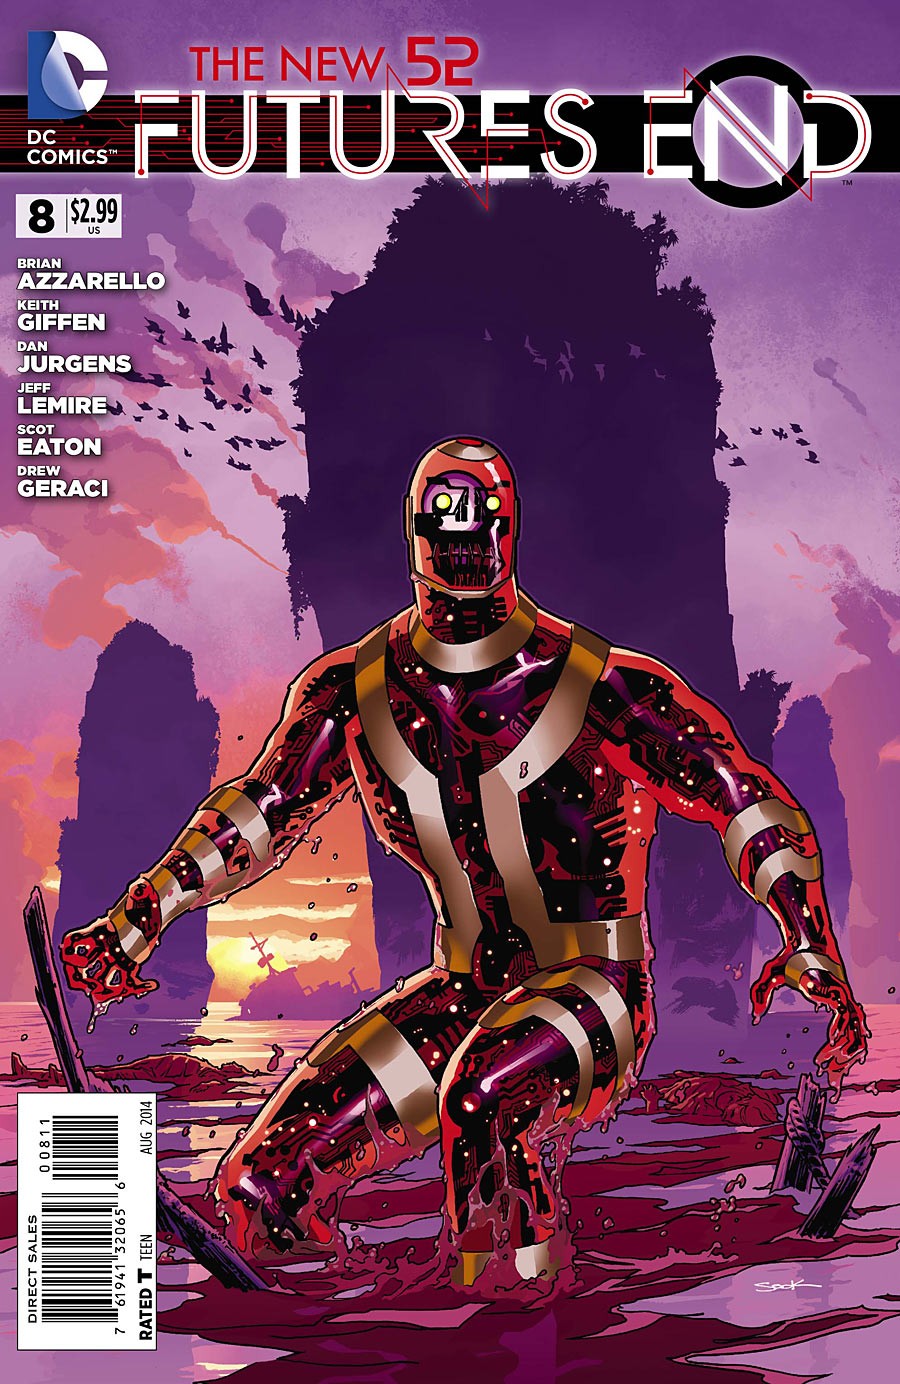 The New 52: Futures End Vol. 1 #8